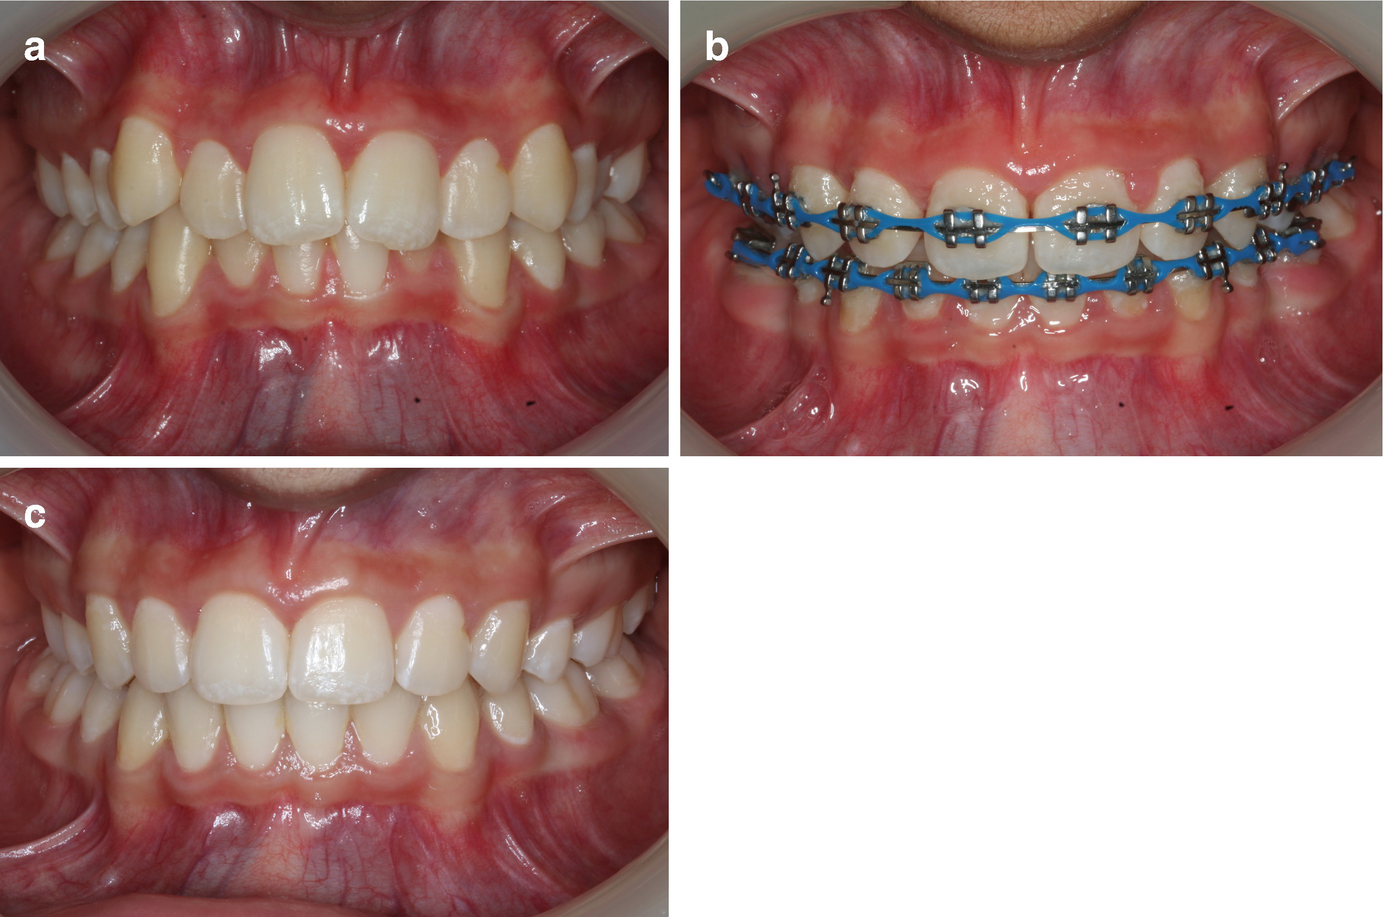 Orthodontic Management Of The Dentition With The Preadjusted Appliance Online